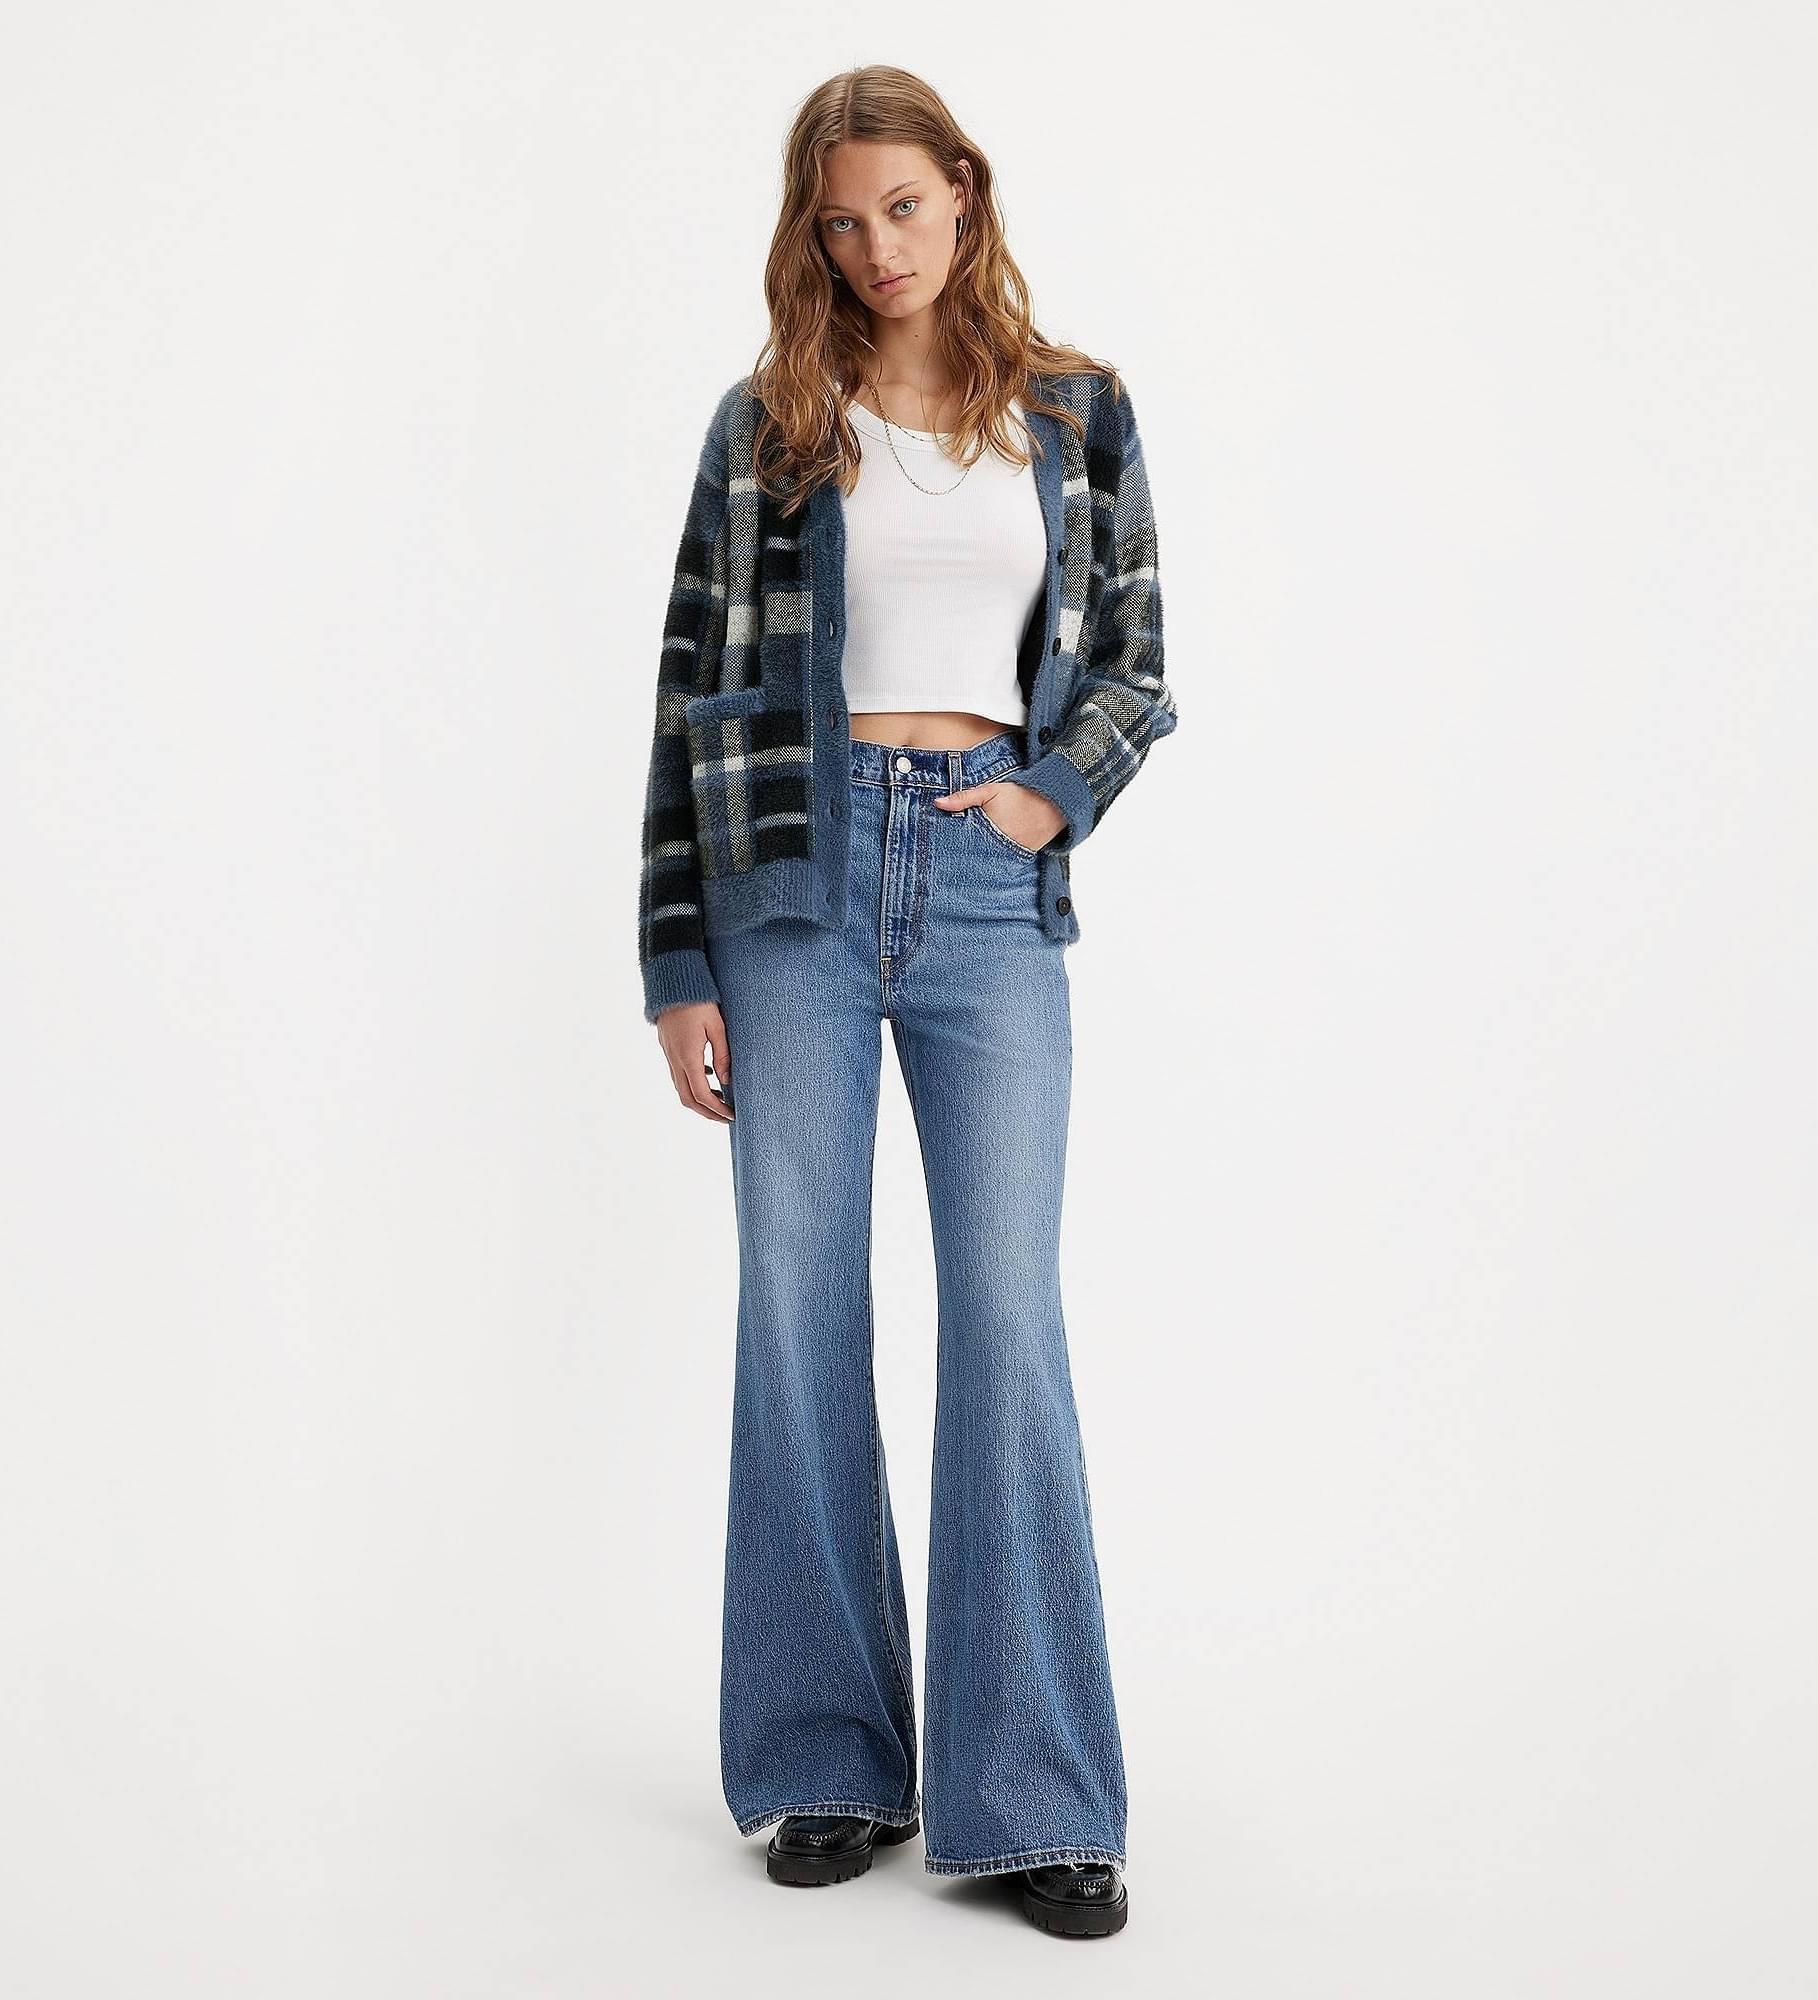 Ribcage Bell Jeans - Levi's Jeans, Jackets & Clothing